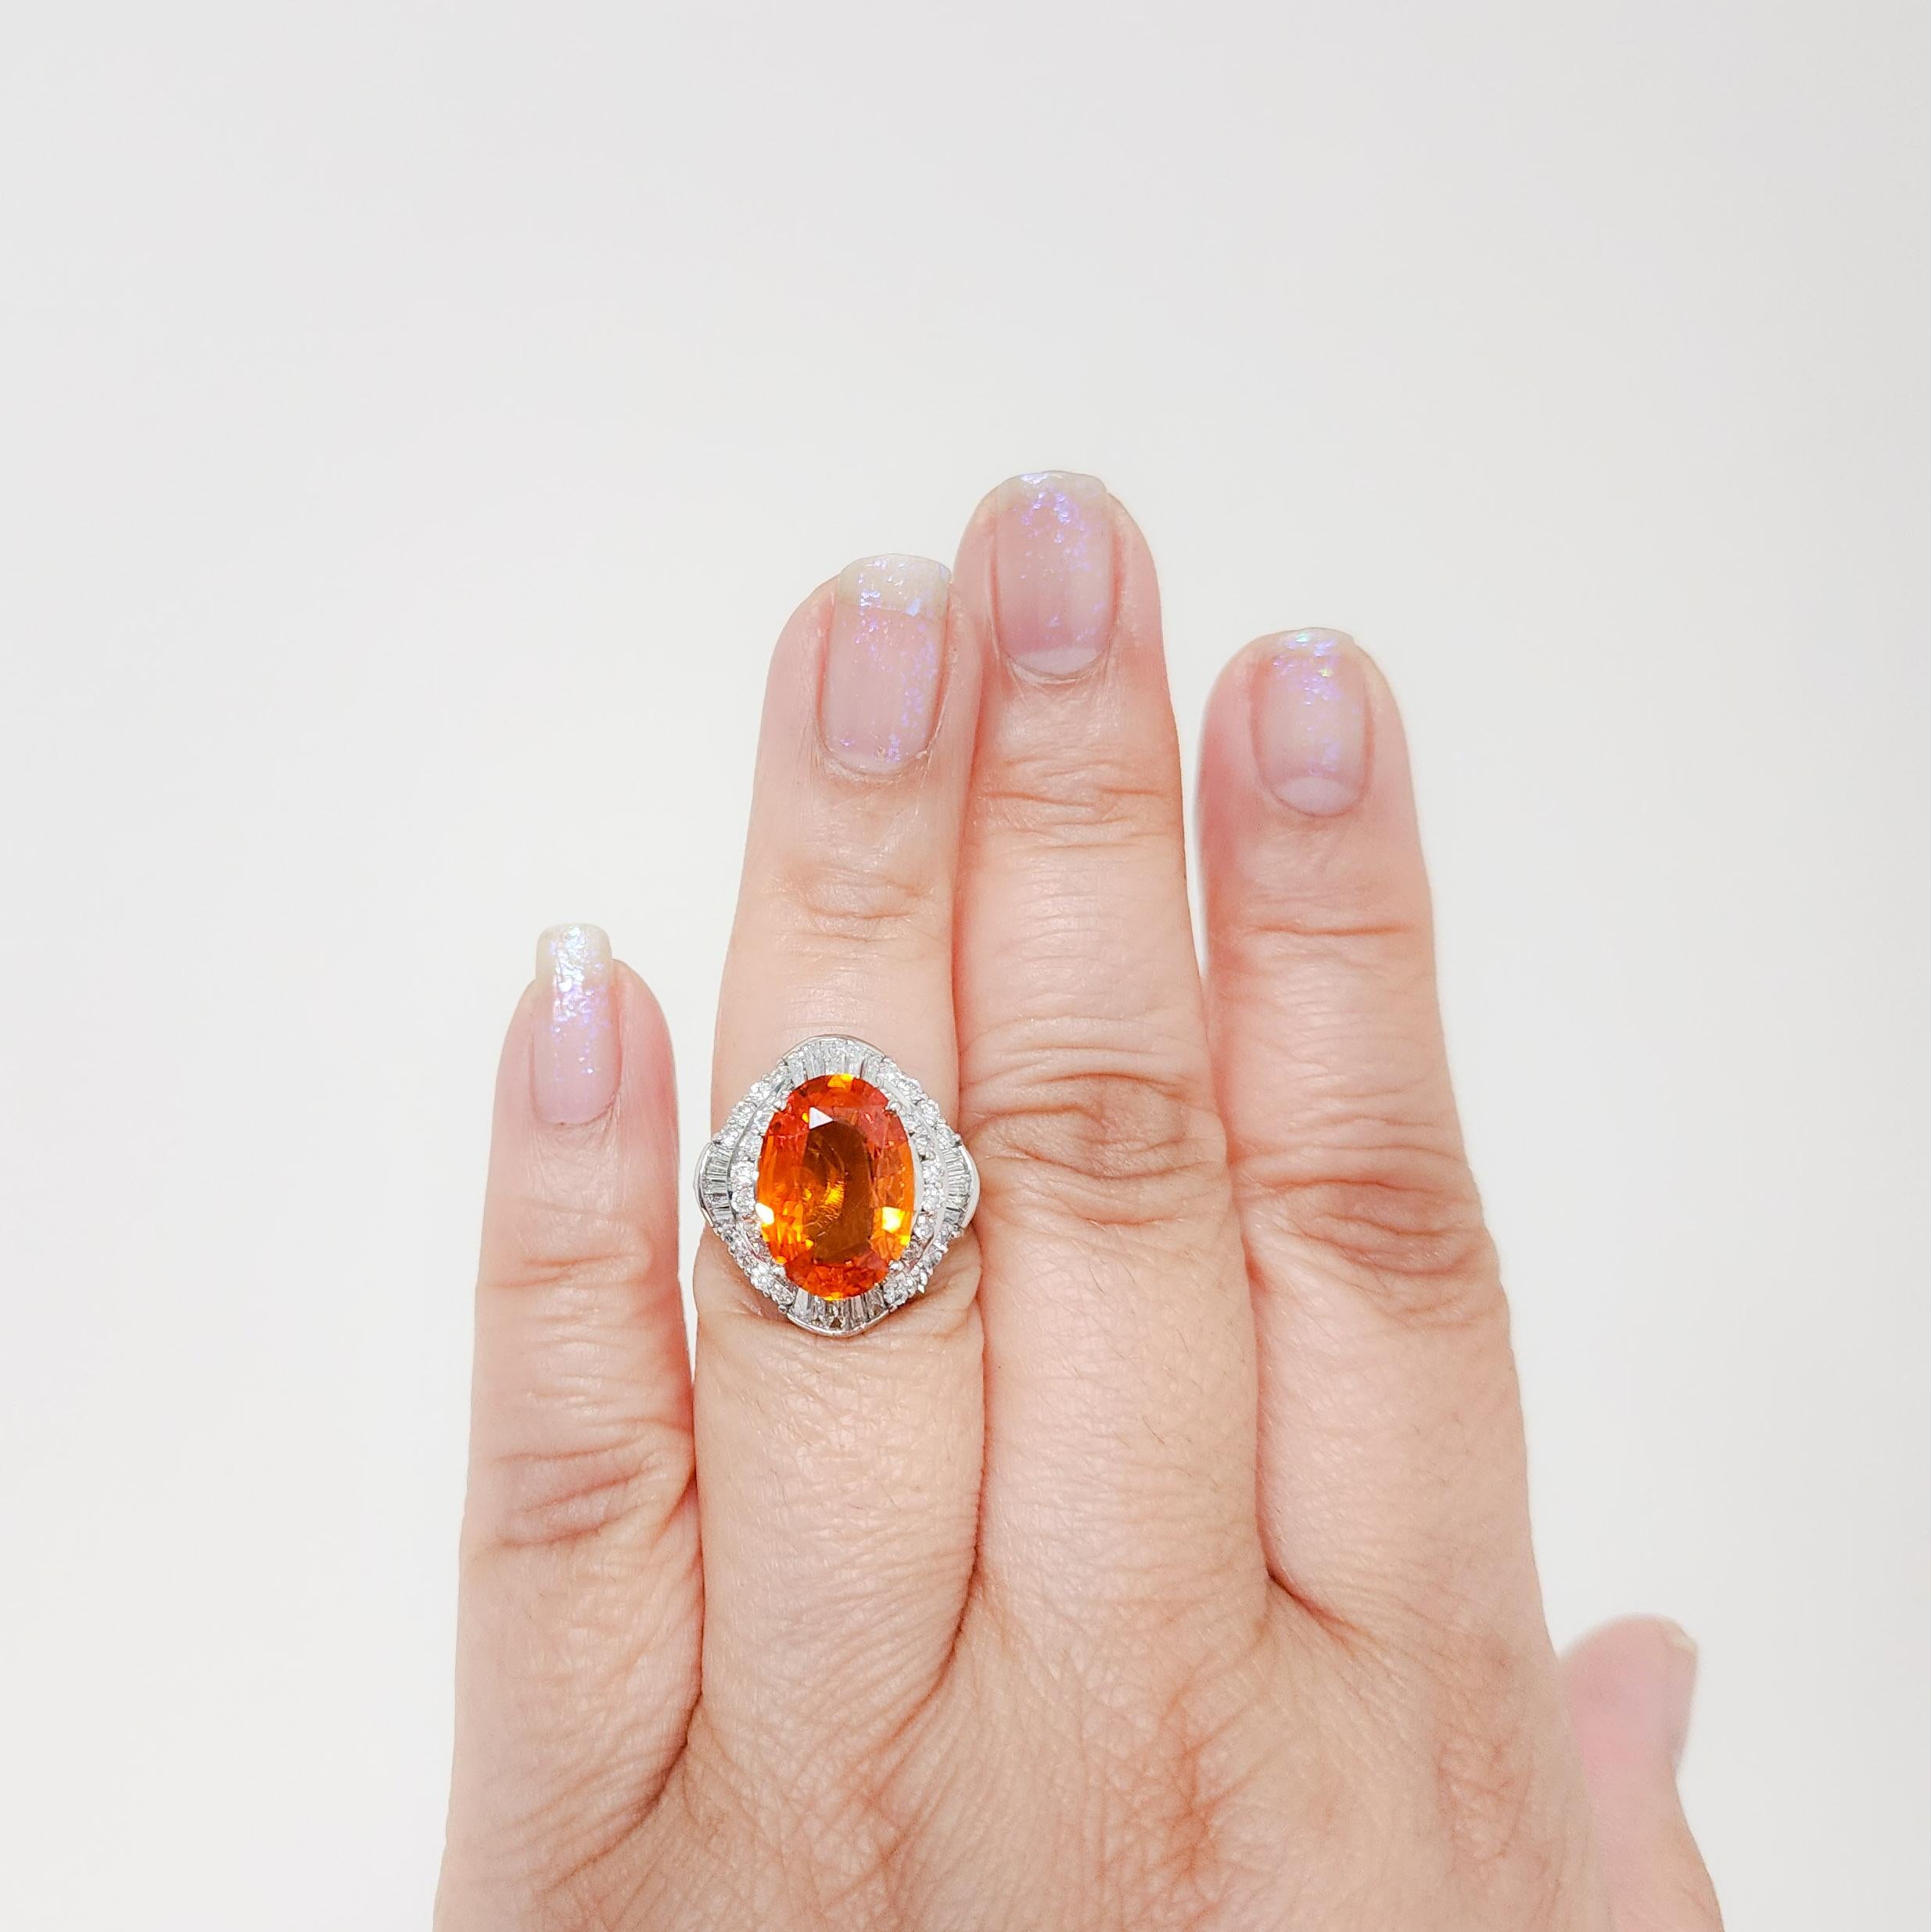 Absolutely stunning 6.17 ct. bright orange sapphire oval with 1.15 ct. good quality white diamond rounds and baguettes.  Handmade in platinum.  Ring size 6.5.
GIA certificate is included.